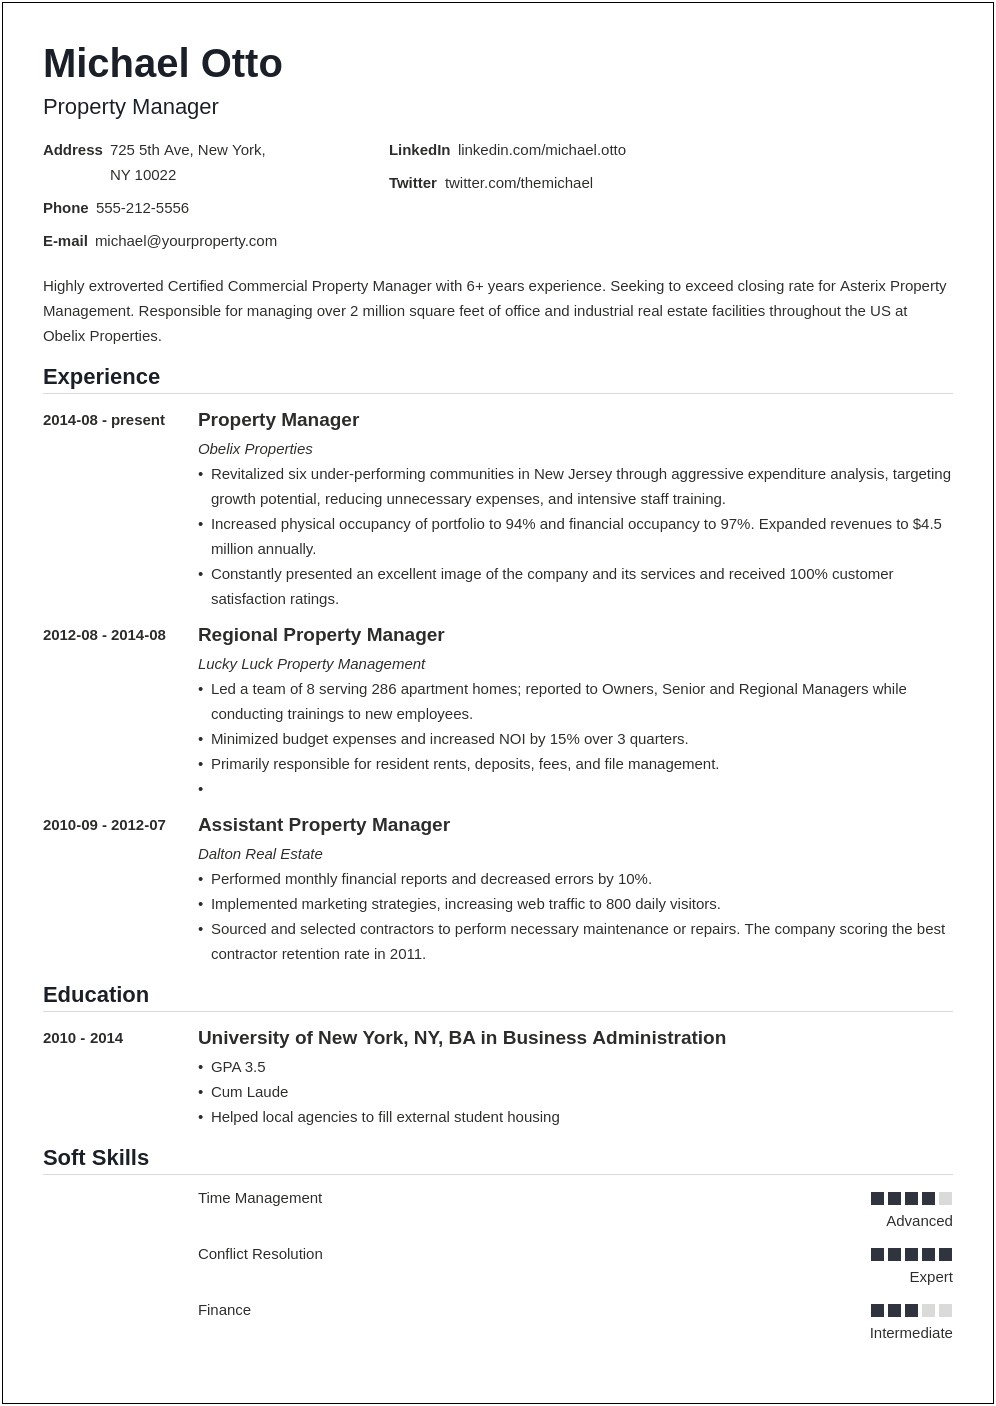 Sample Resume For Assistant Property Manager Accomplishments